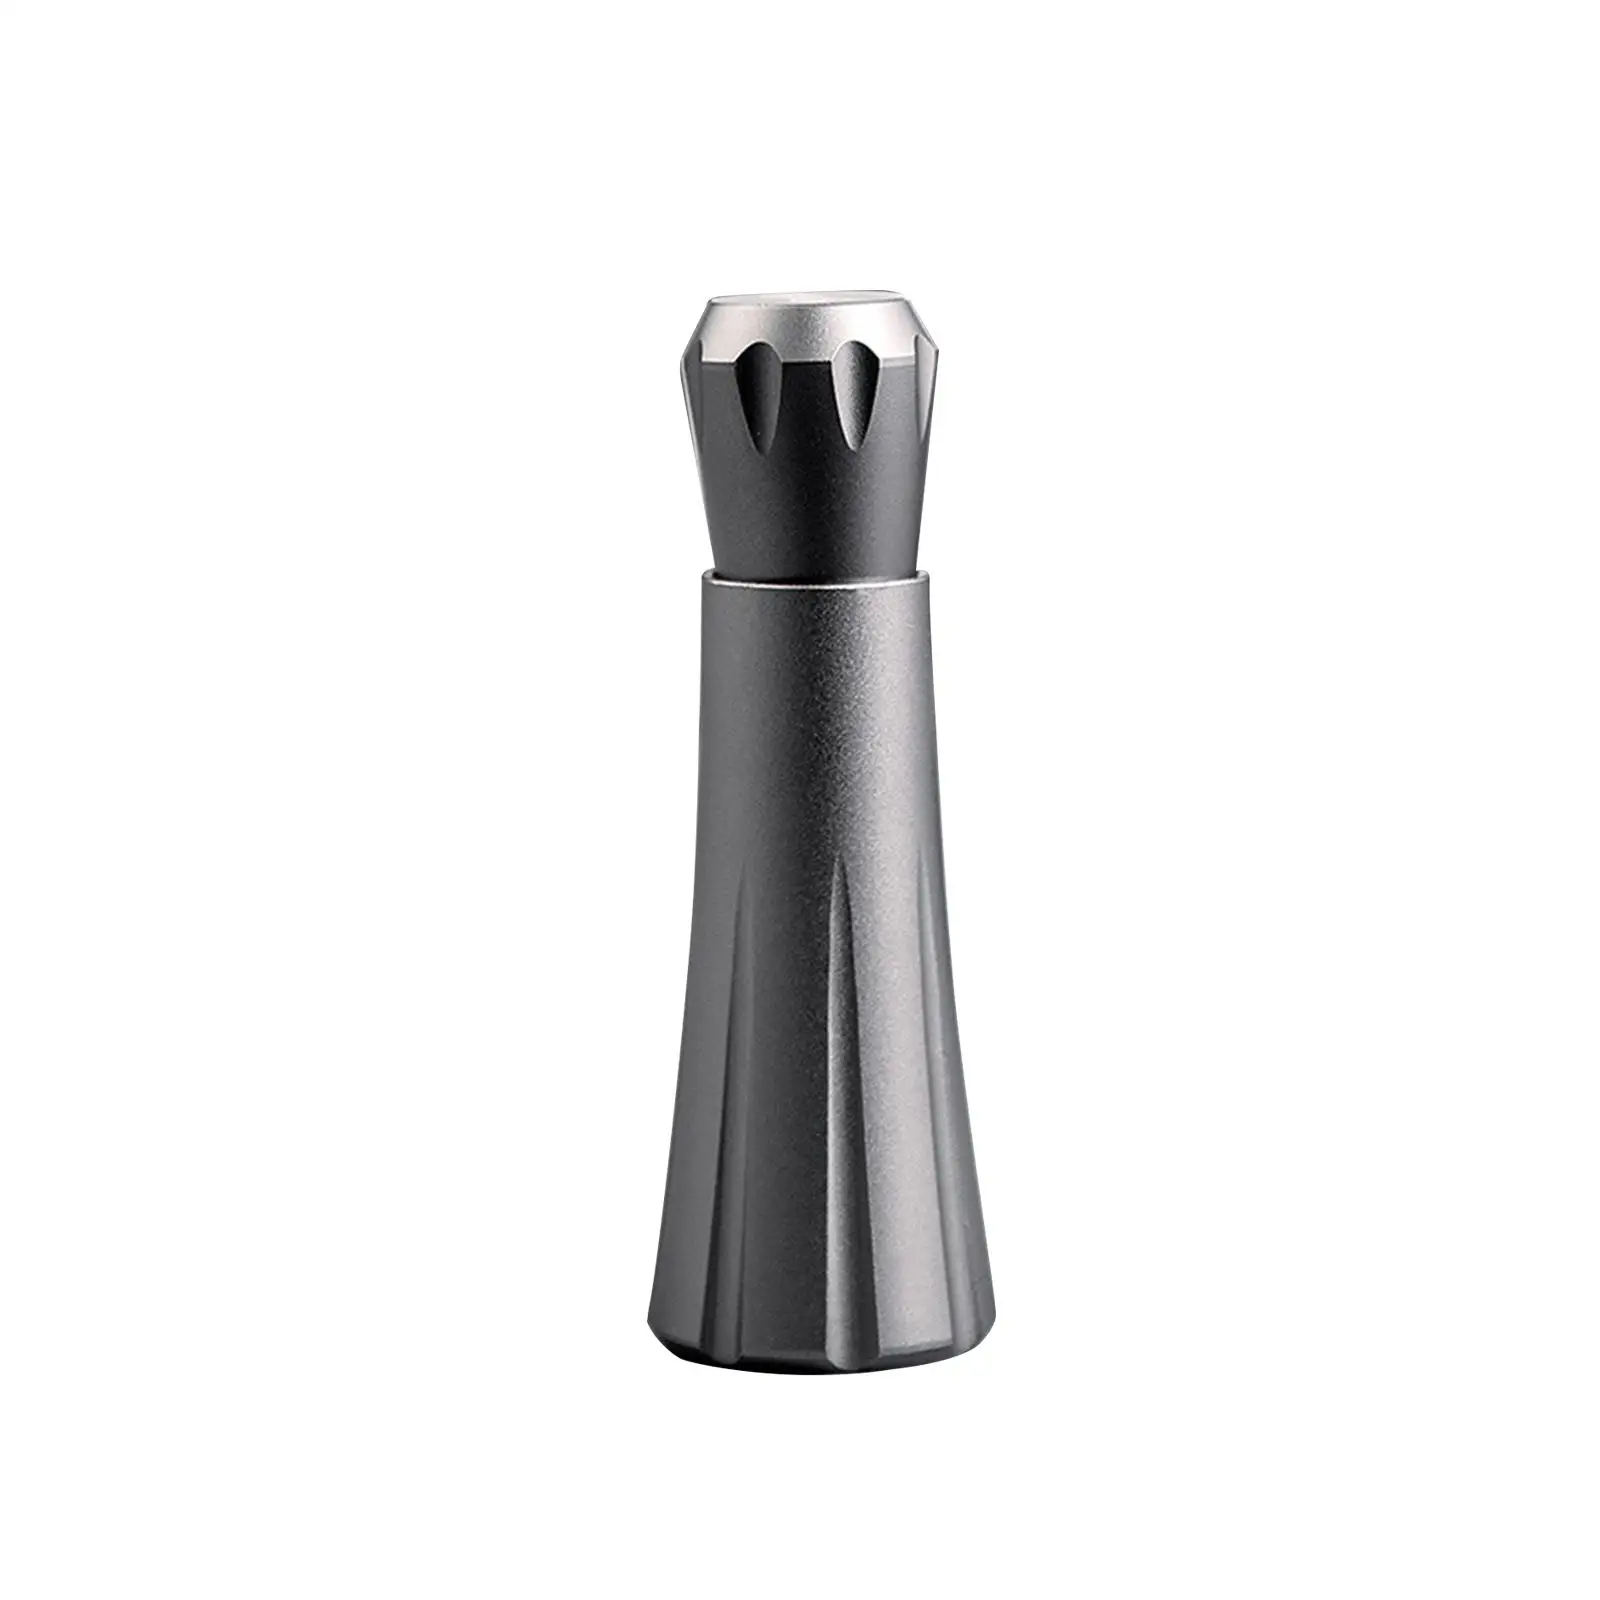 Coffee Stirring Tamper Coffee Tamper Distributor Coffee Leveler Tool Hand Stirrer Tool Portable Espresso Tools for Home Gifts